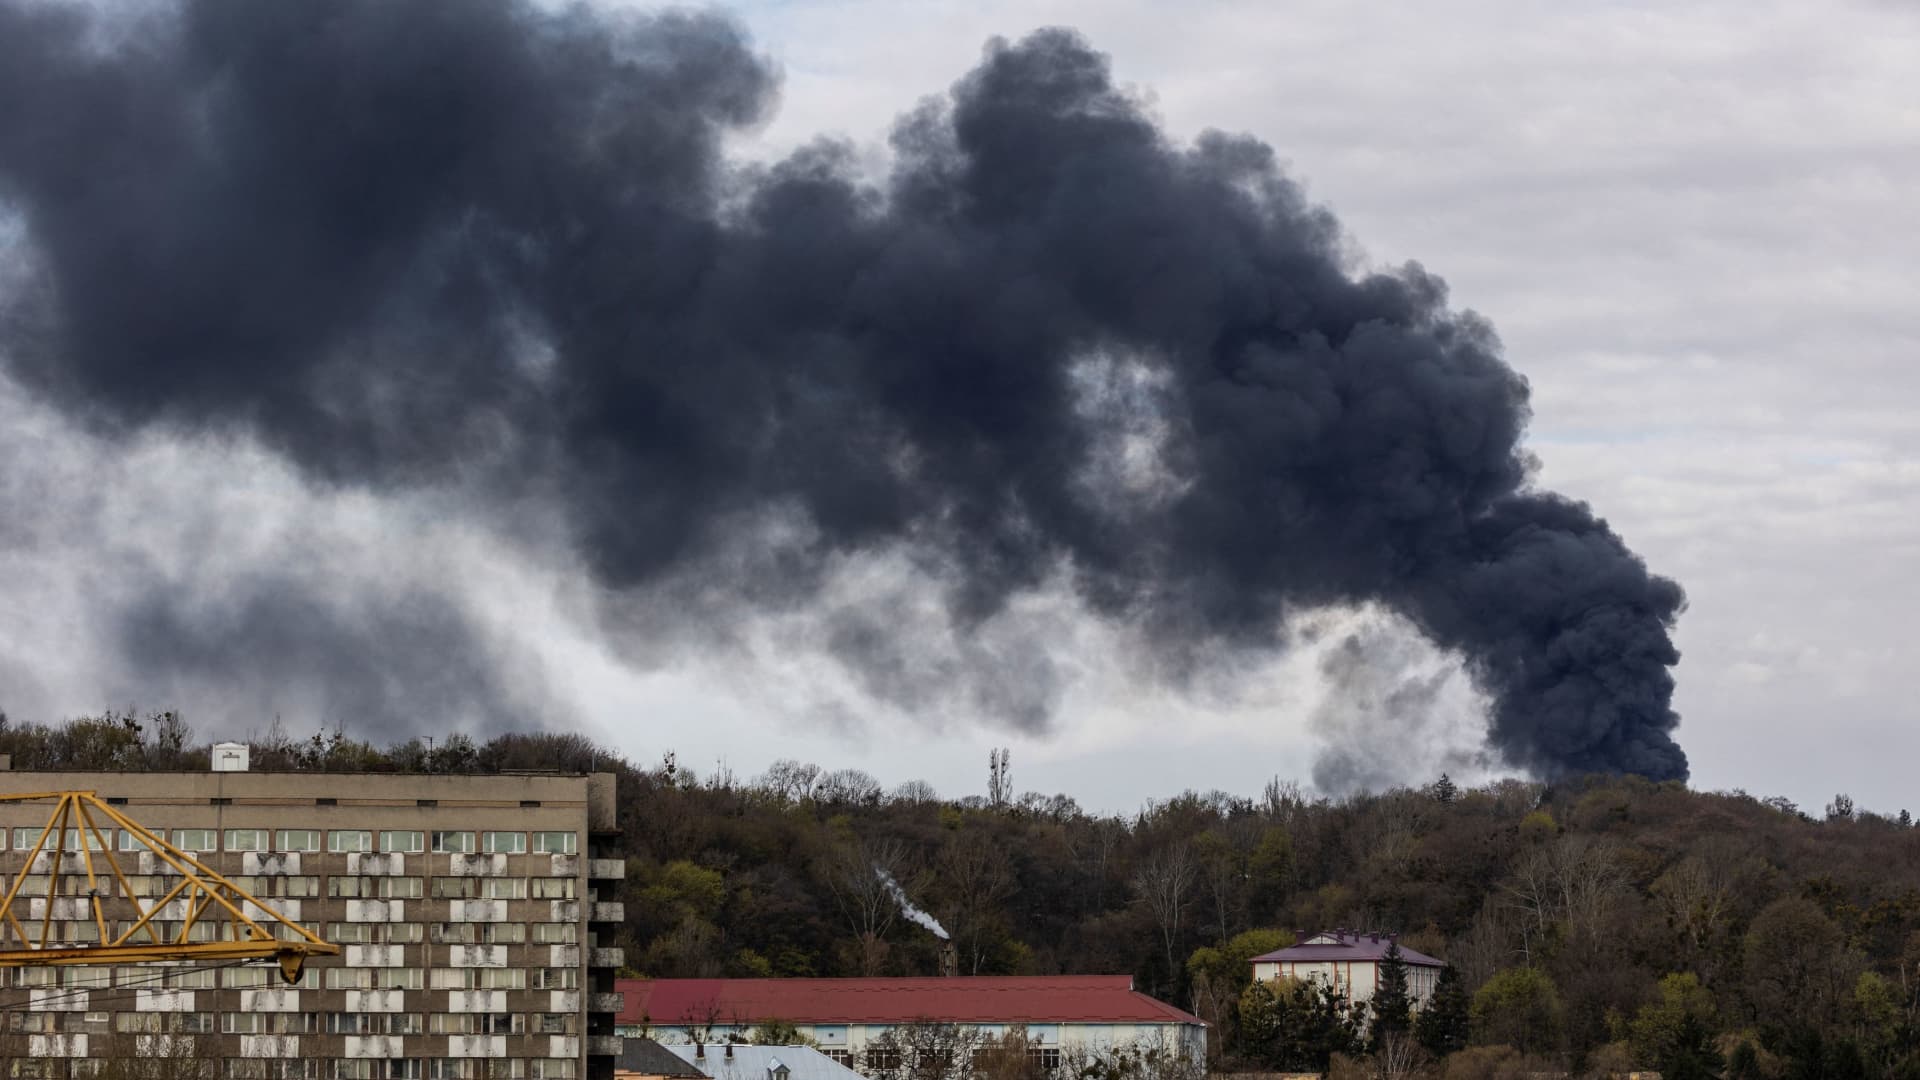 Smoke rises after missile strikes, as Russia's attack on Ukraine continues, in Lviv, Ukraine April 18, 2022.